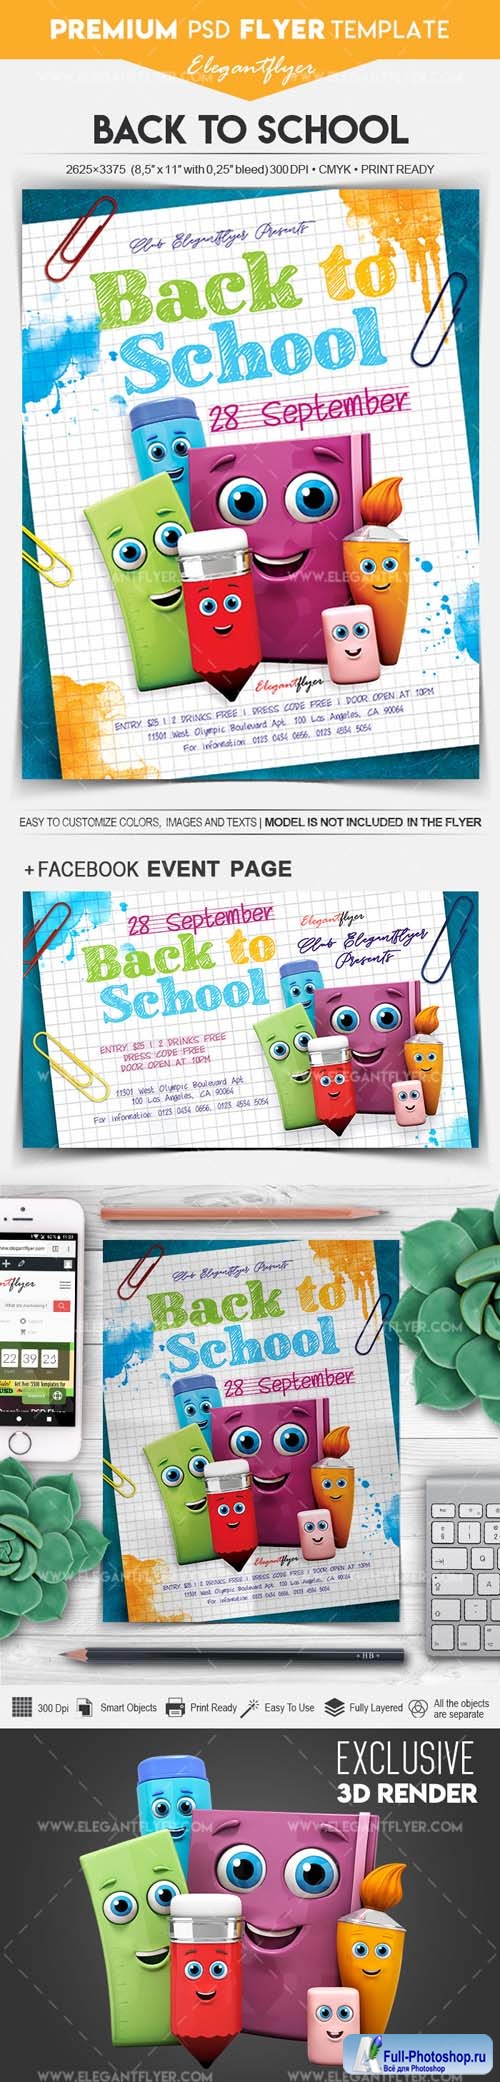 Back to School Flyer PSD Template vol 7